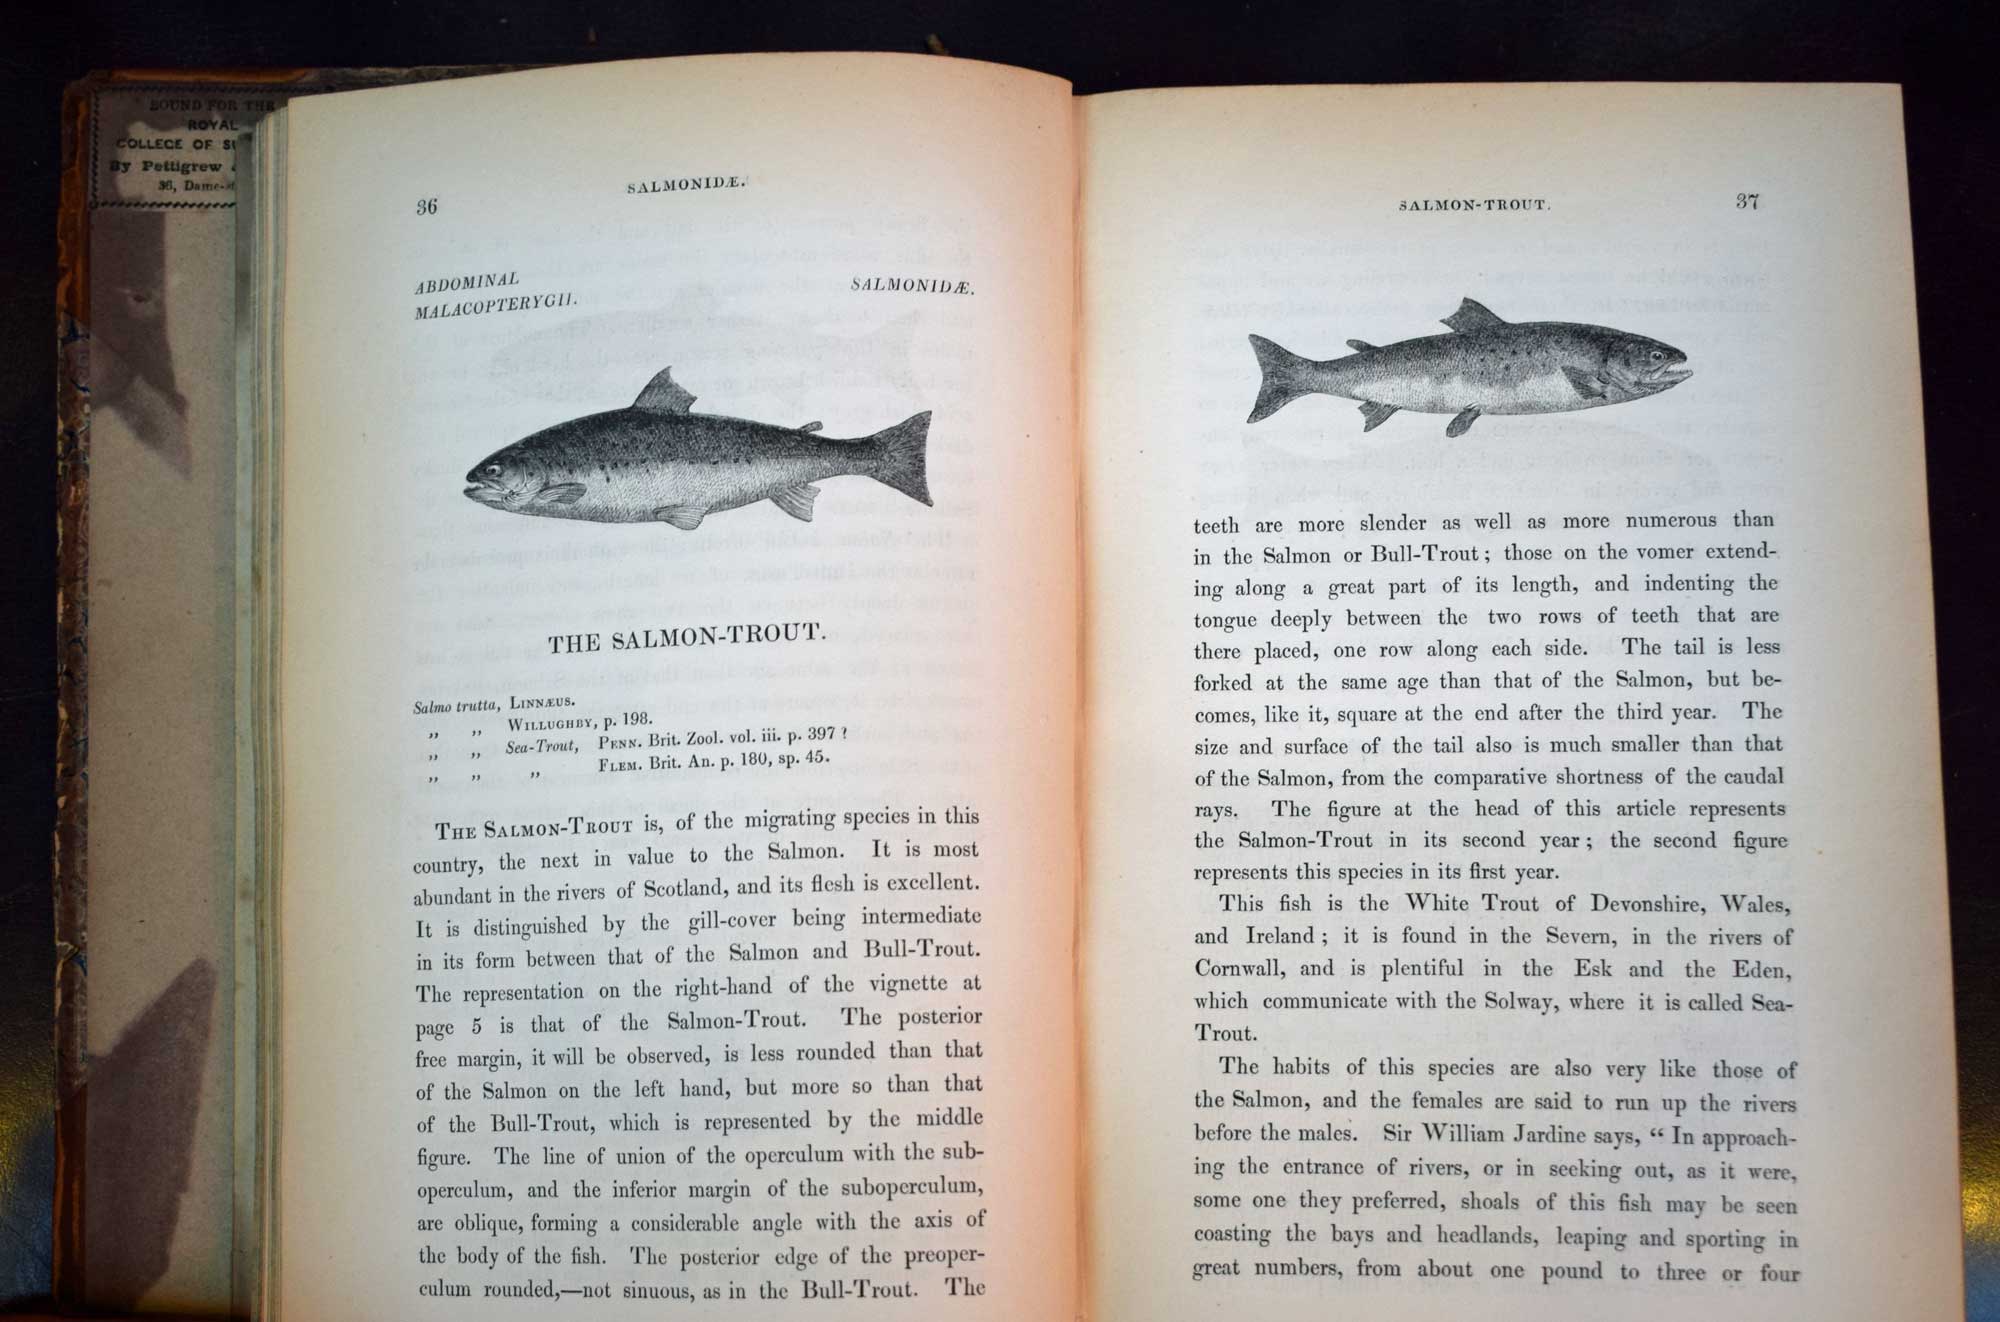 A History of British Fishes. With Supplement for both volumes bound in one volume. 2 volume set.